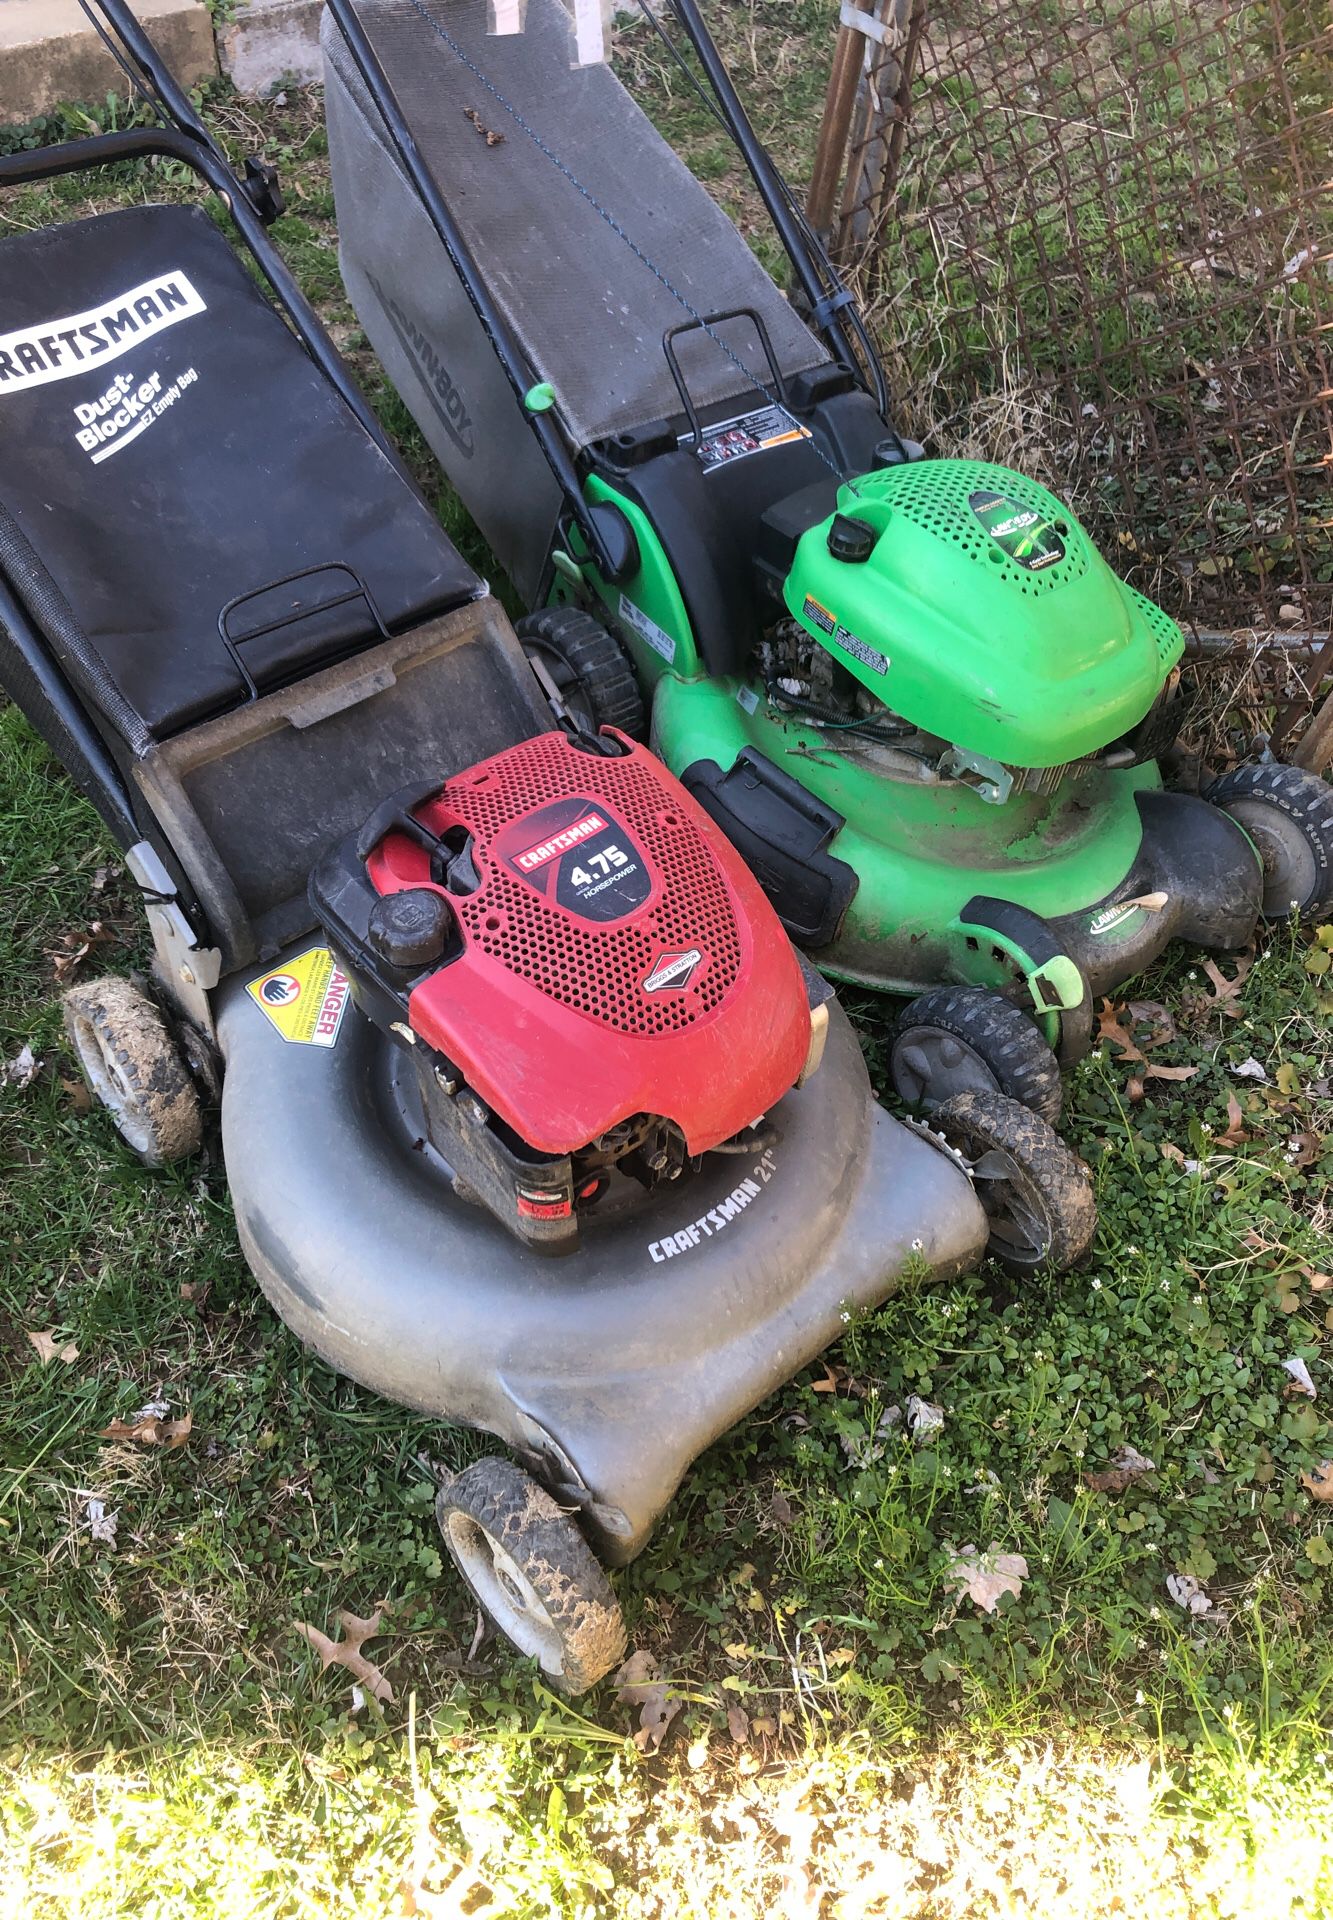 Two Lawnmowers for parts